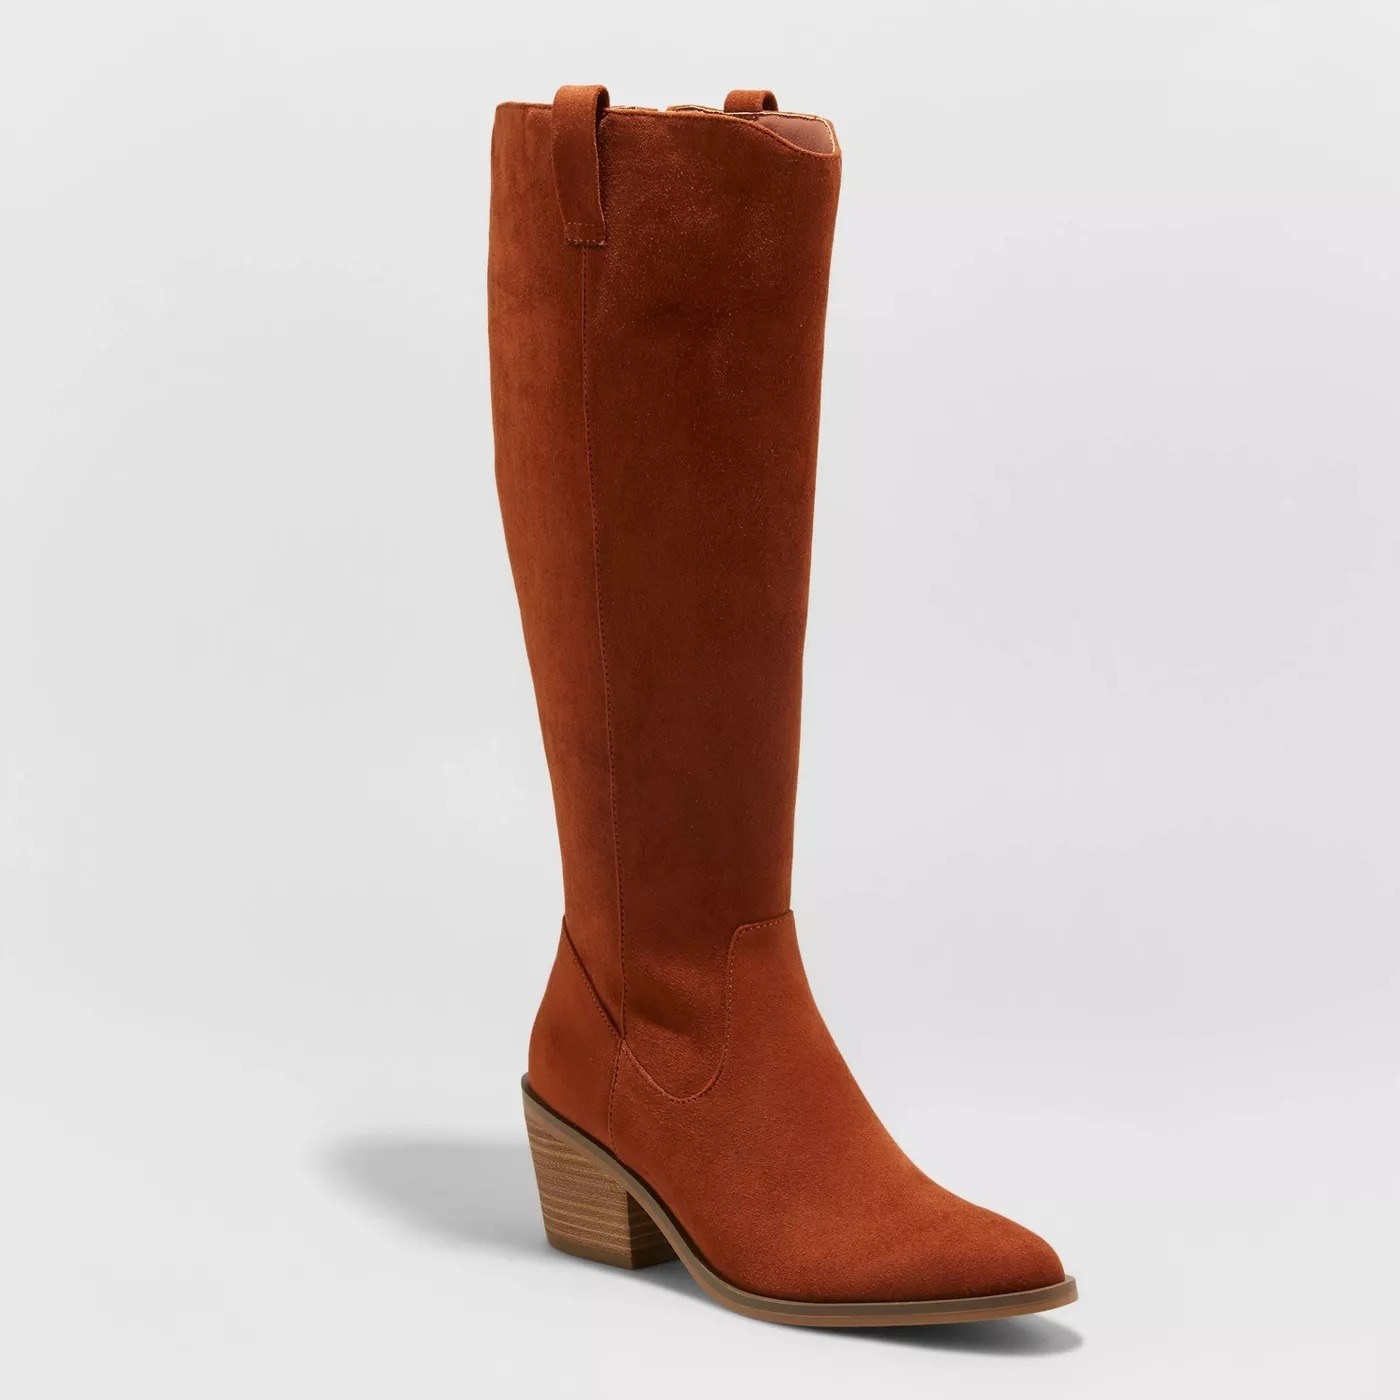 The burnt orange boot with brown sole